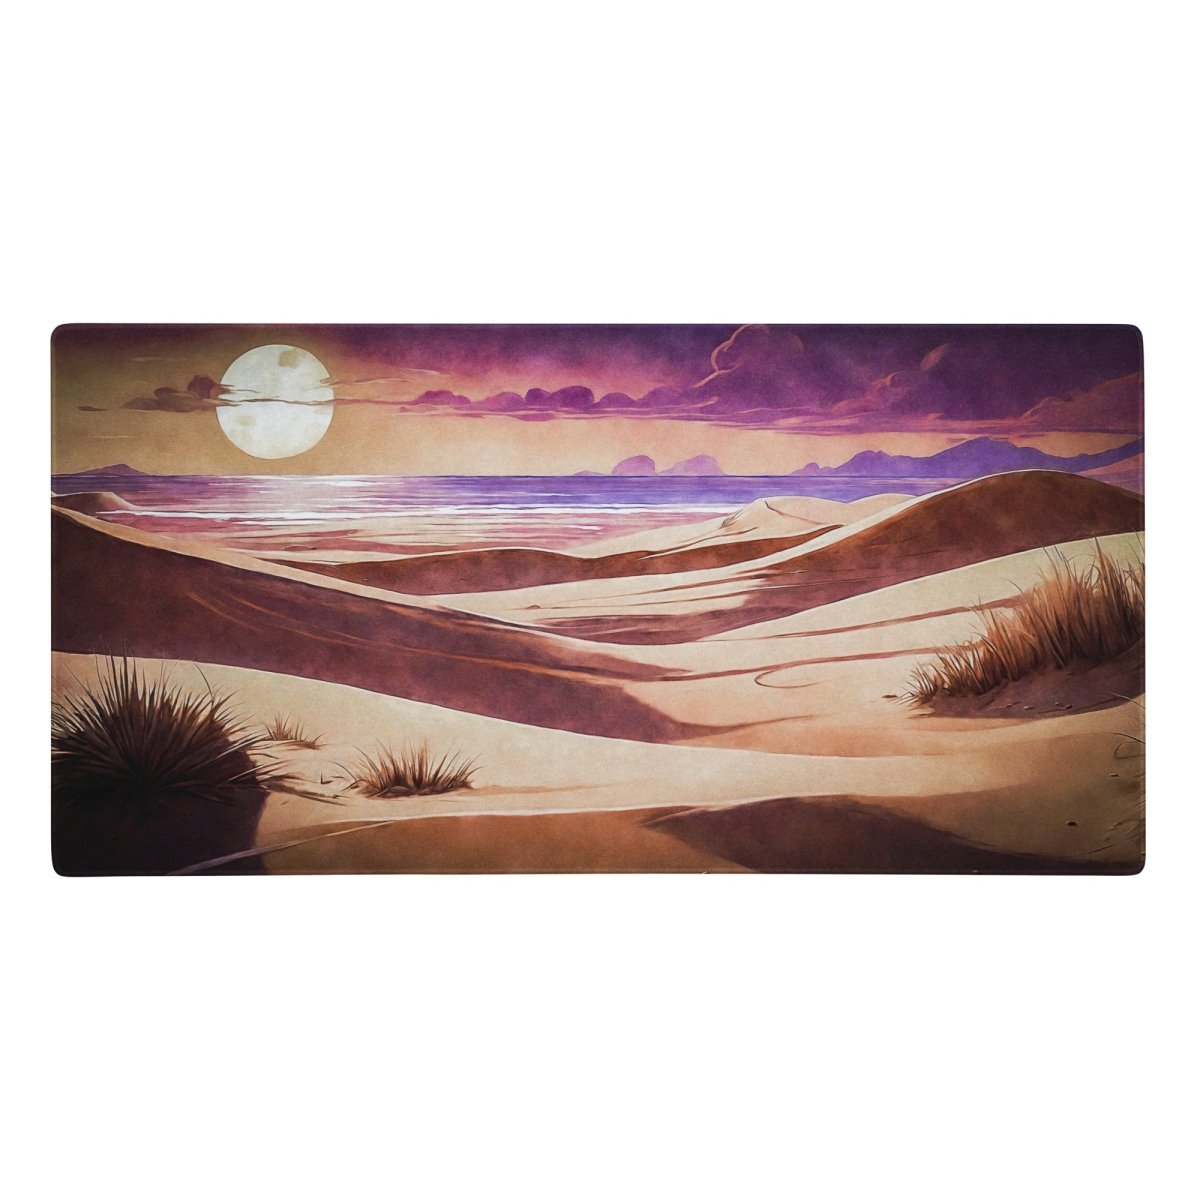 Misty desert sands - Gaming mouse pad - Ever colorful